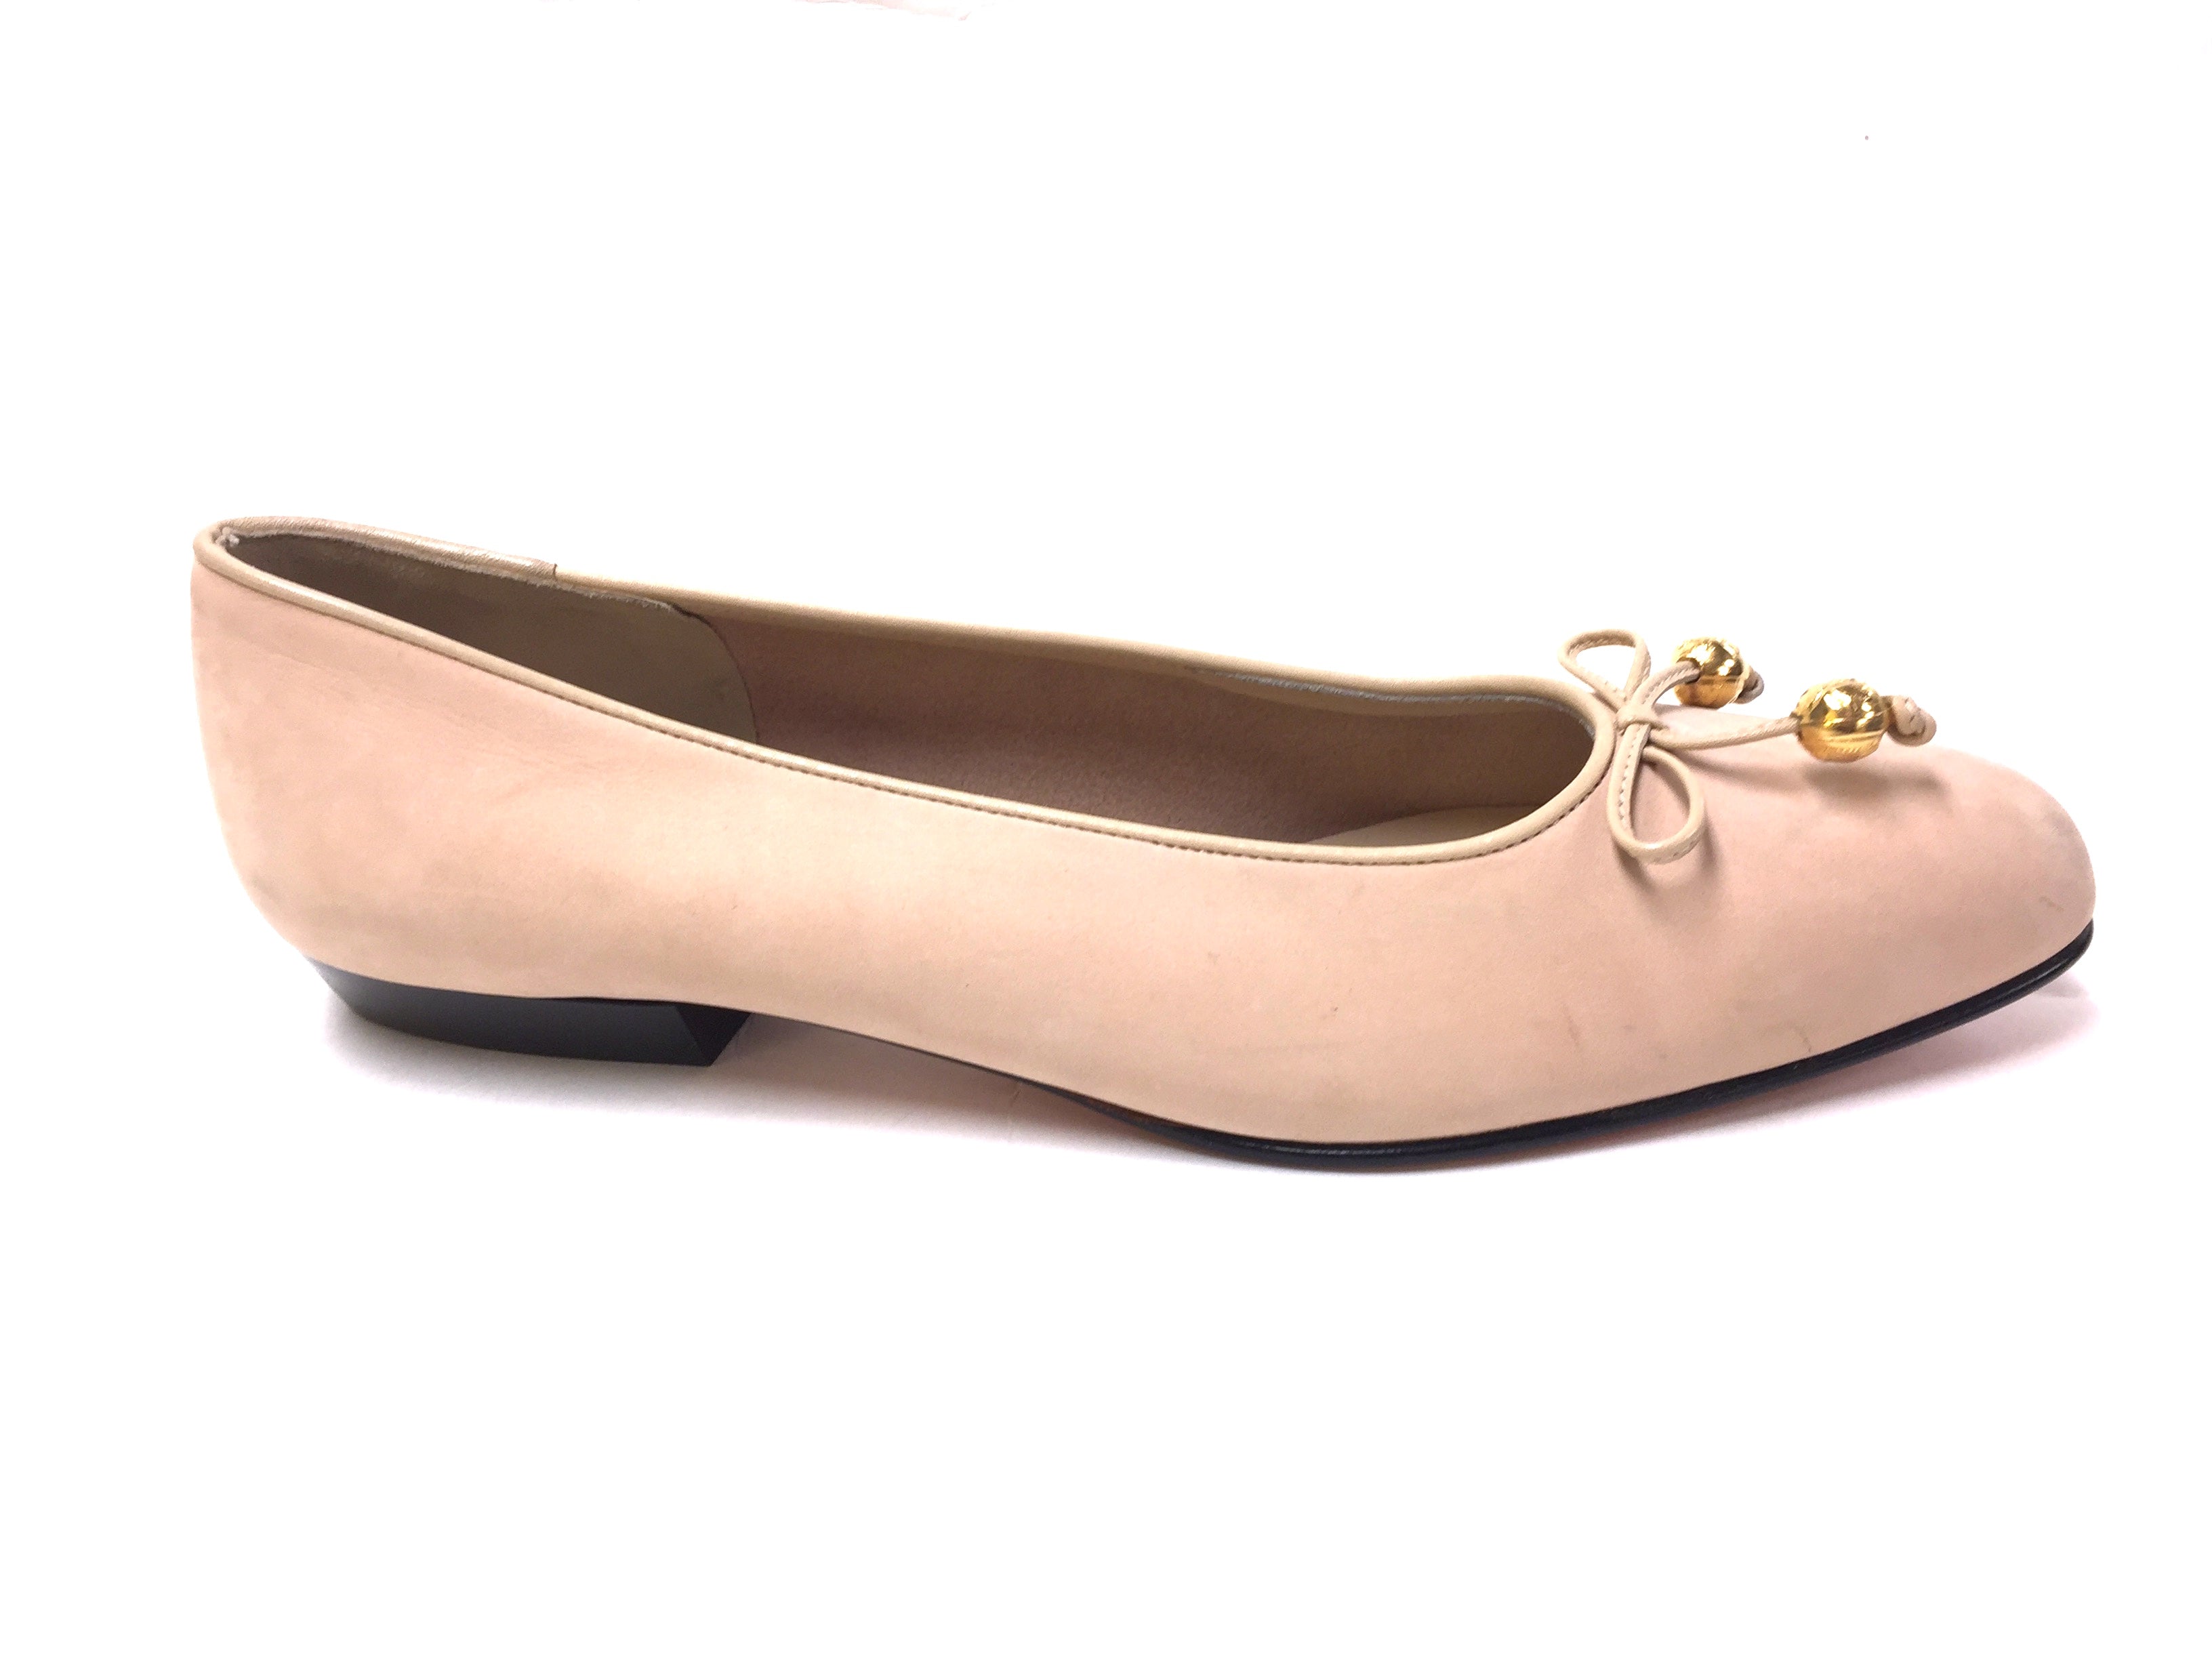 blush colored flat shoes